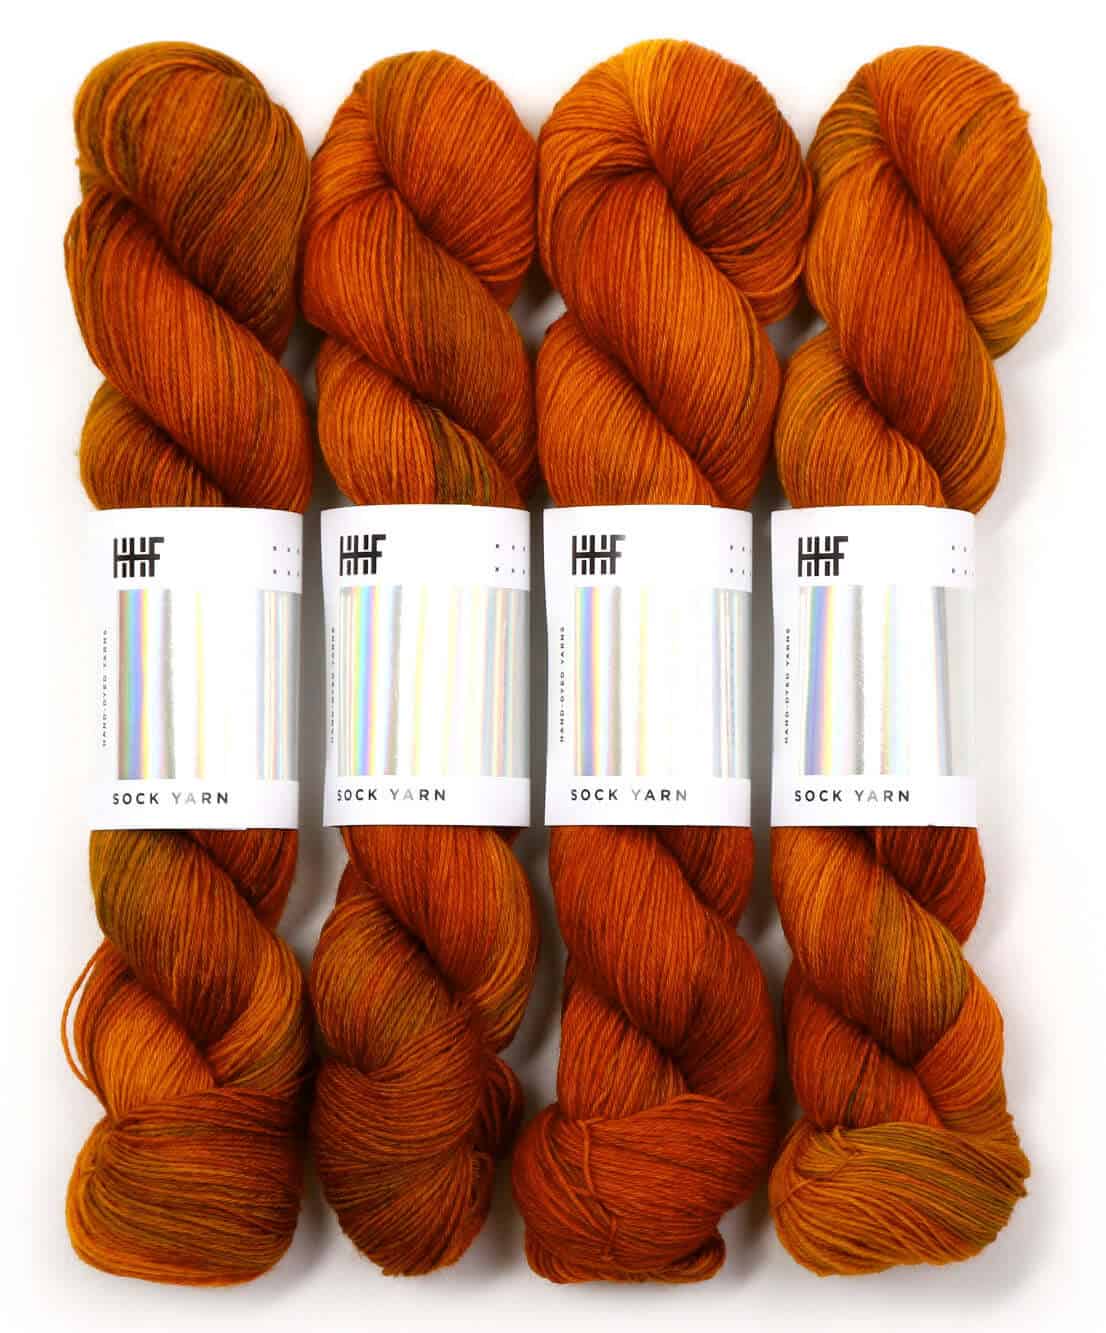 Discontinued - Copper Penny 4Ply